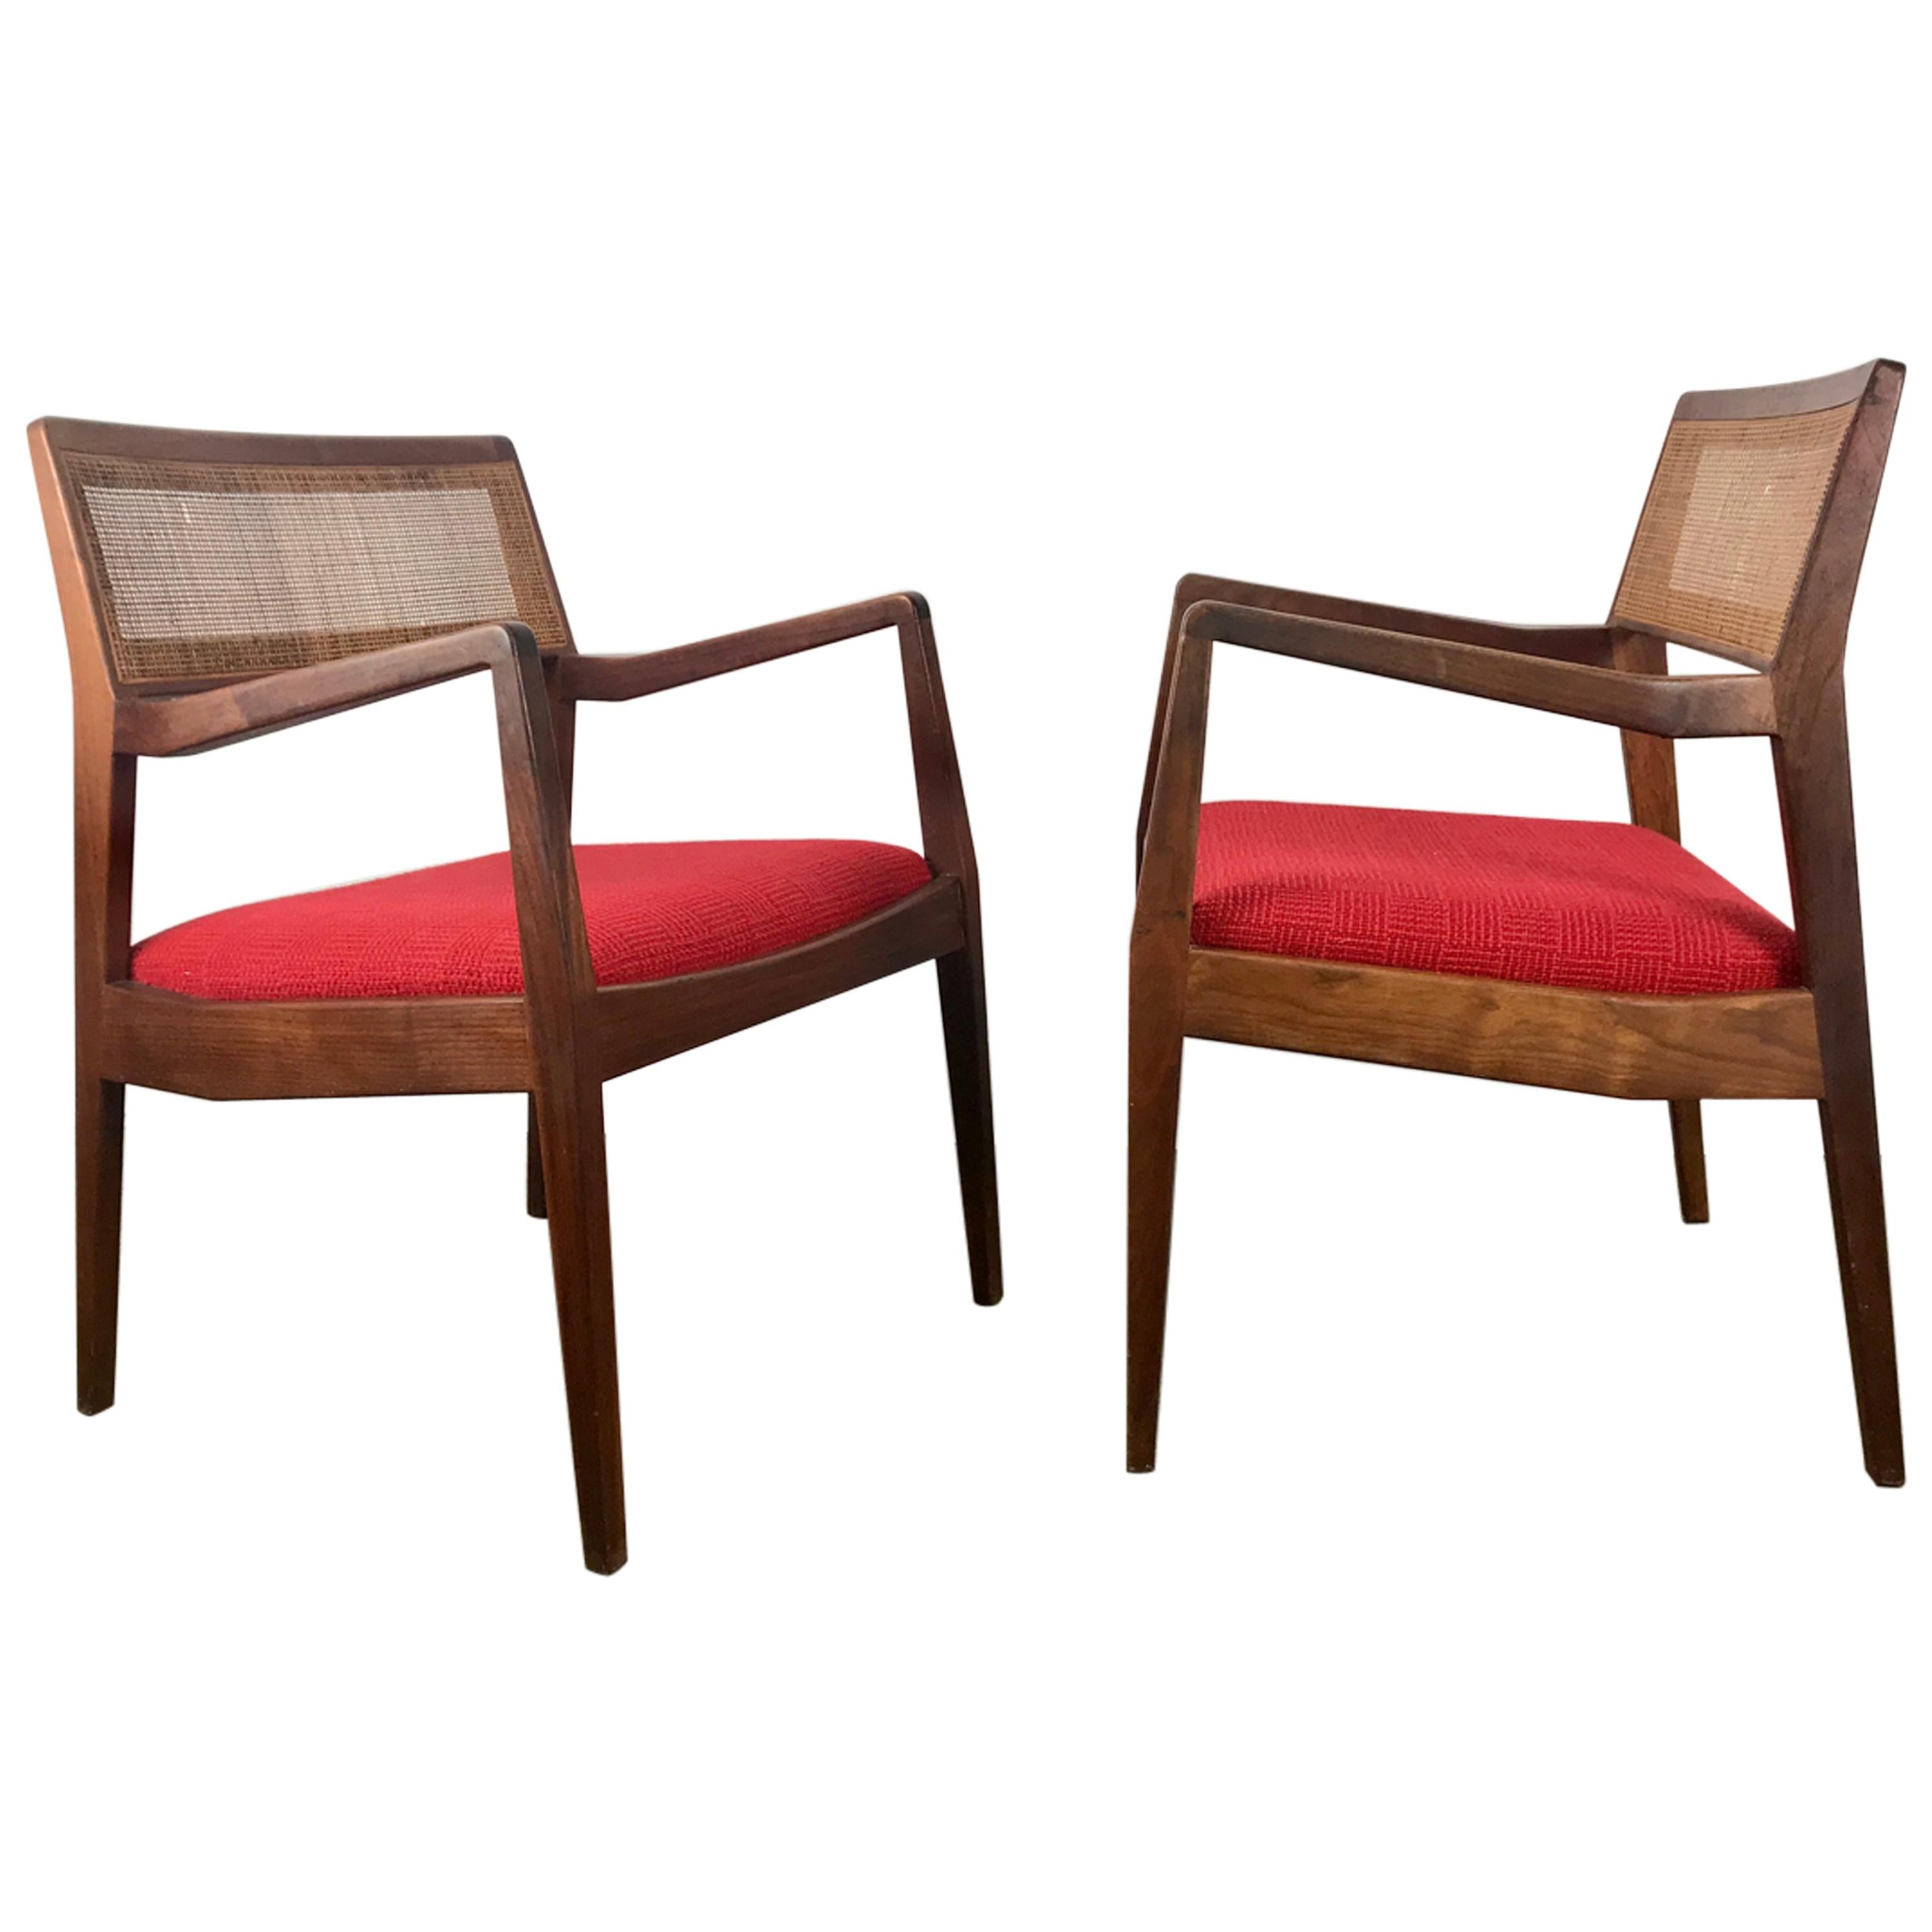 Matched Pair of Modernist Jens Risom Walnut and Caned Back Lounge Chair